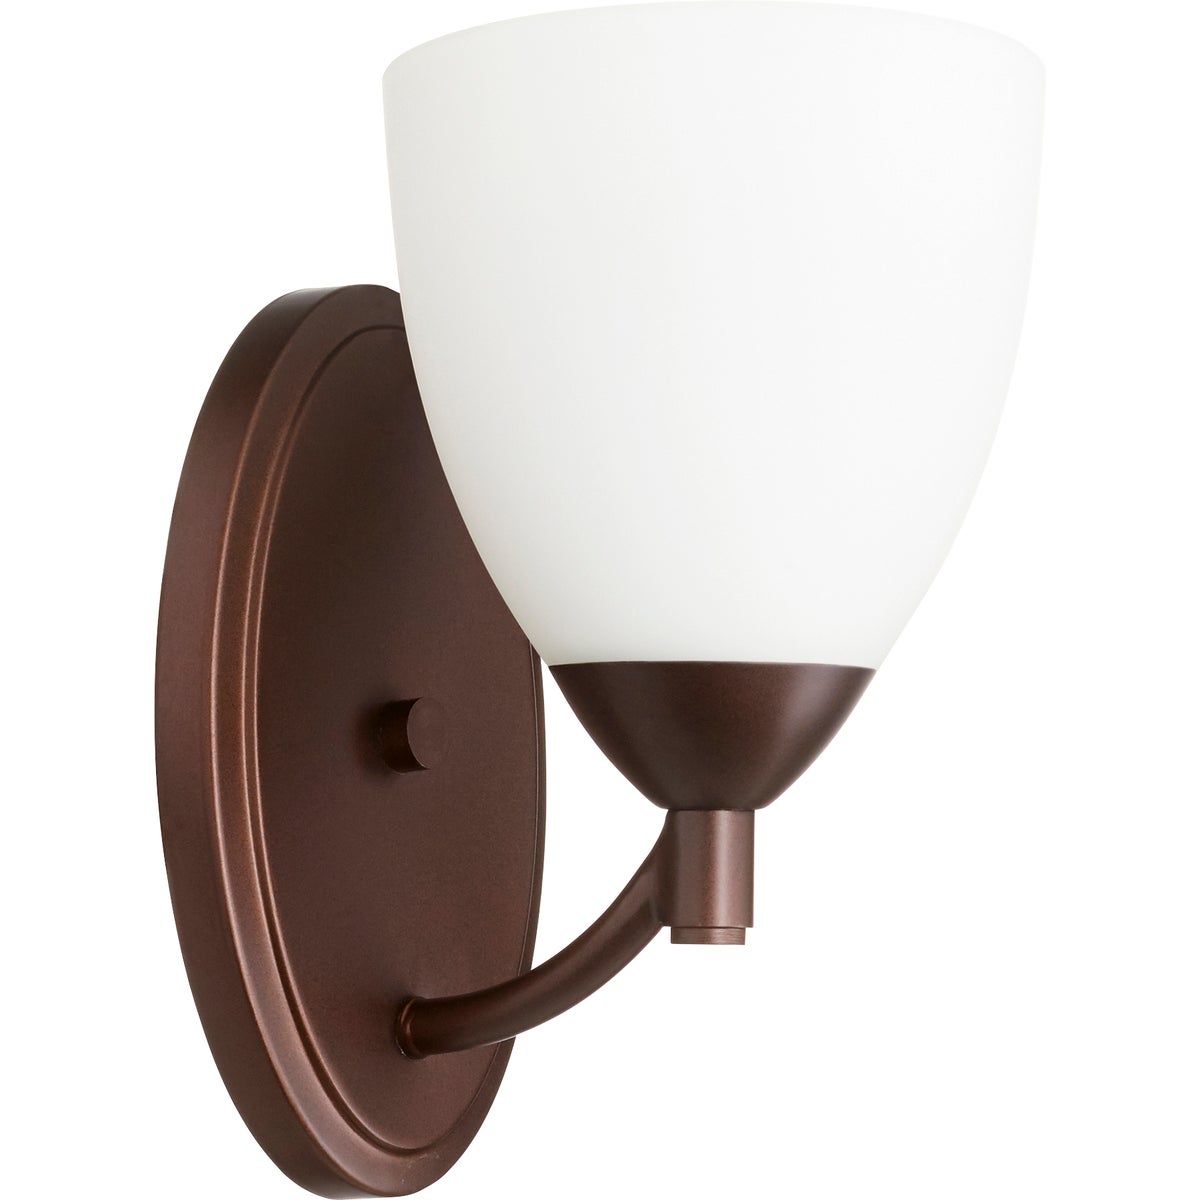 Barkley 1 Light Traditional Oiled Bronze Wall Sconce